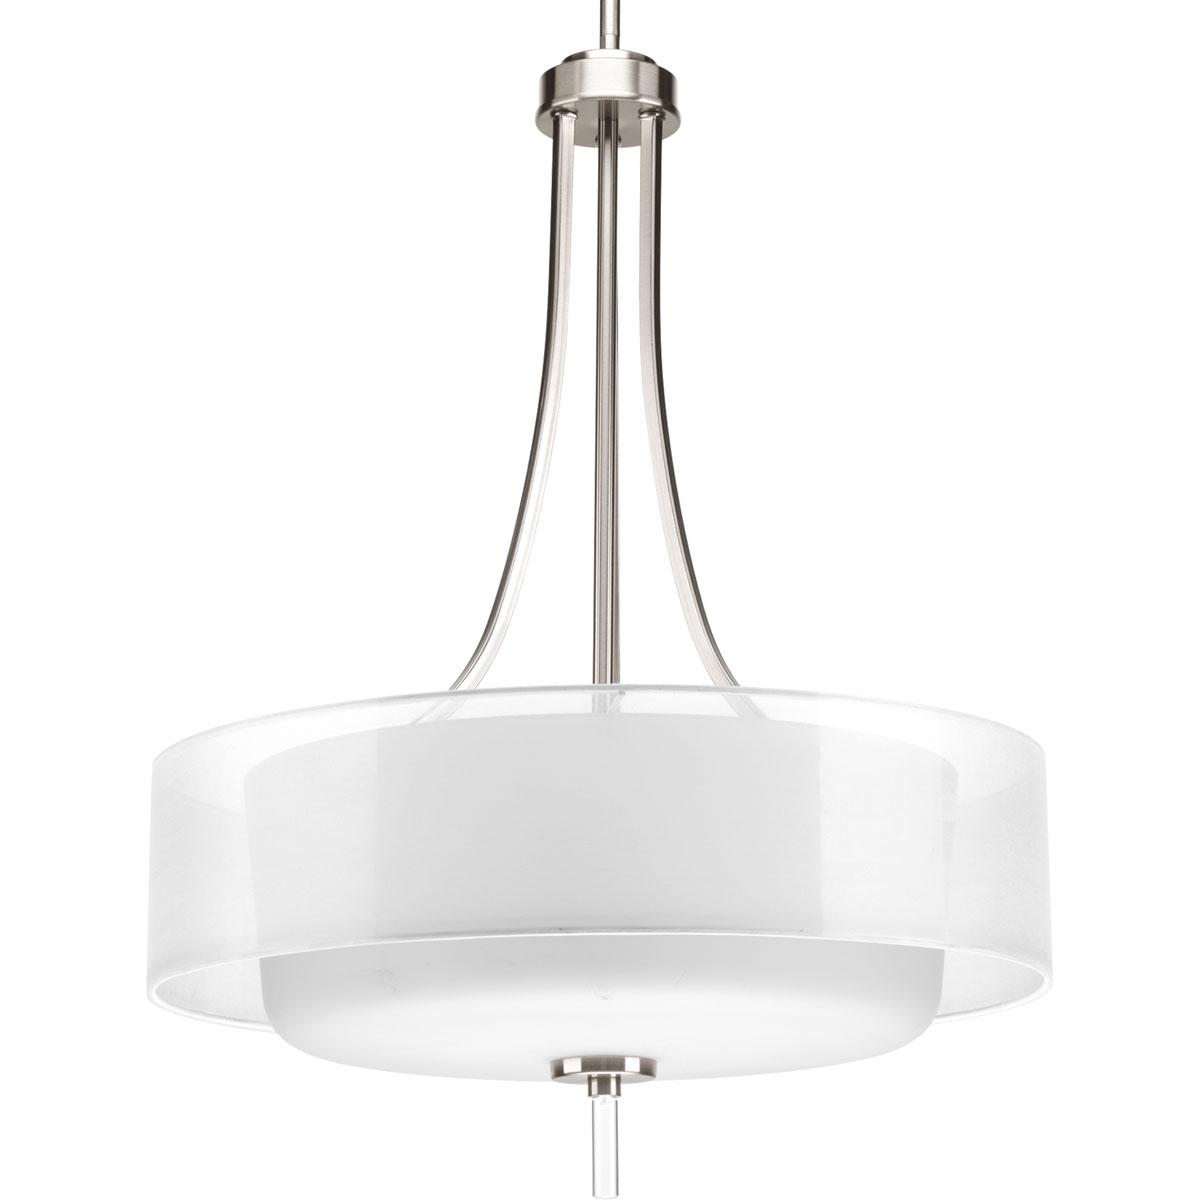 Hubbell P5047-09 Invite the beauty of light into your home with this Brushed Nickel four-light pendant. Invite provides a welcoming silhouette with a unique shade comprised of an inner glass globe encircled by a translucent sheer Mylar shade. The rich, layering effect cre